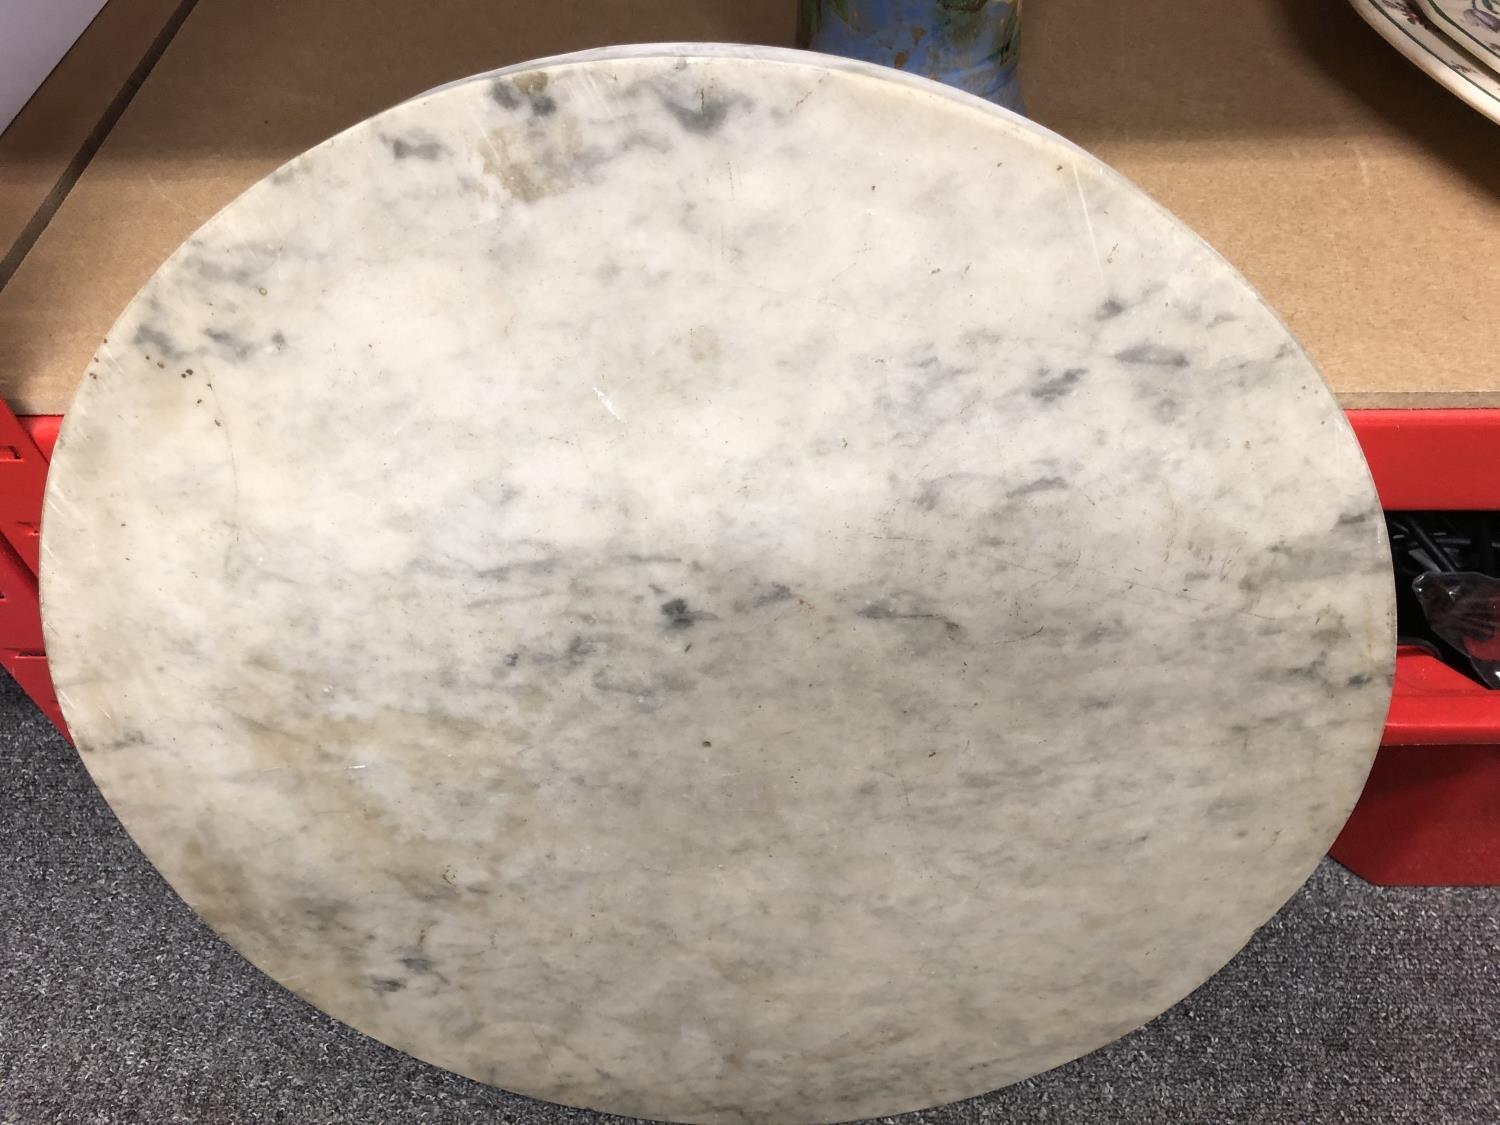 A variegated grey/white marble circular table top, 47cm diam - Image 2 of 4